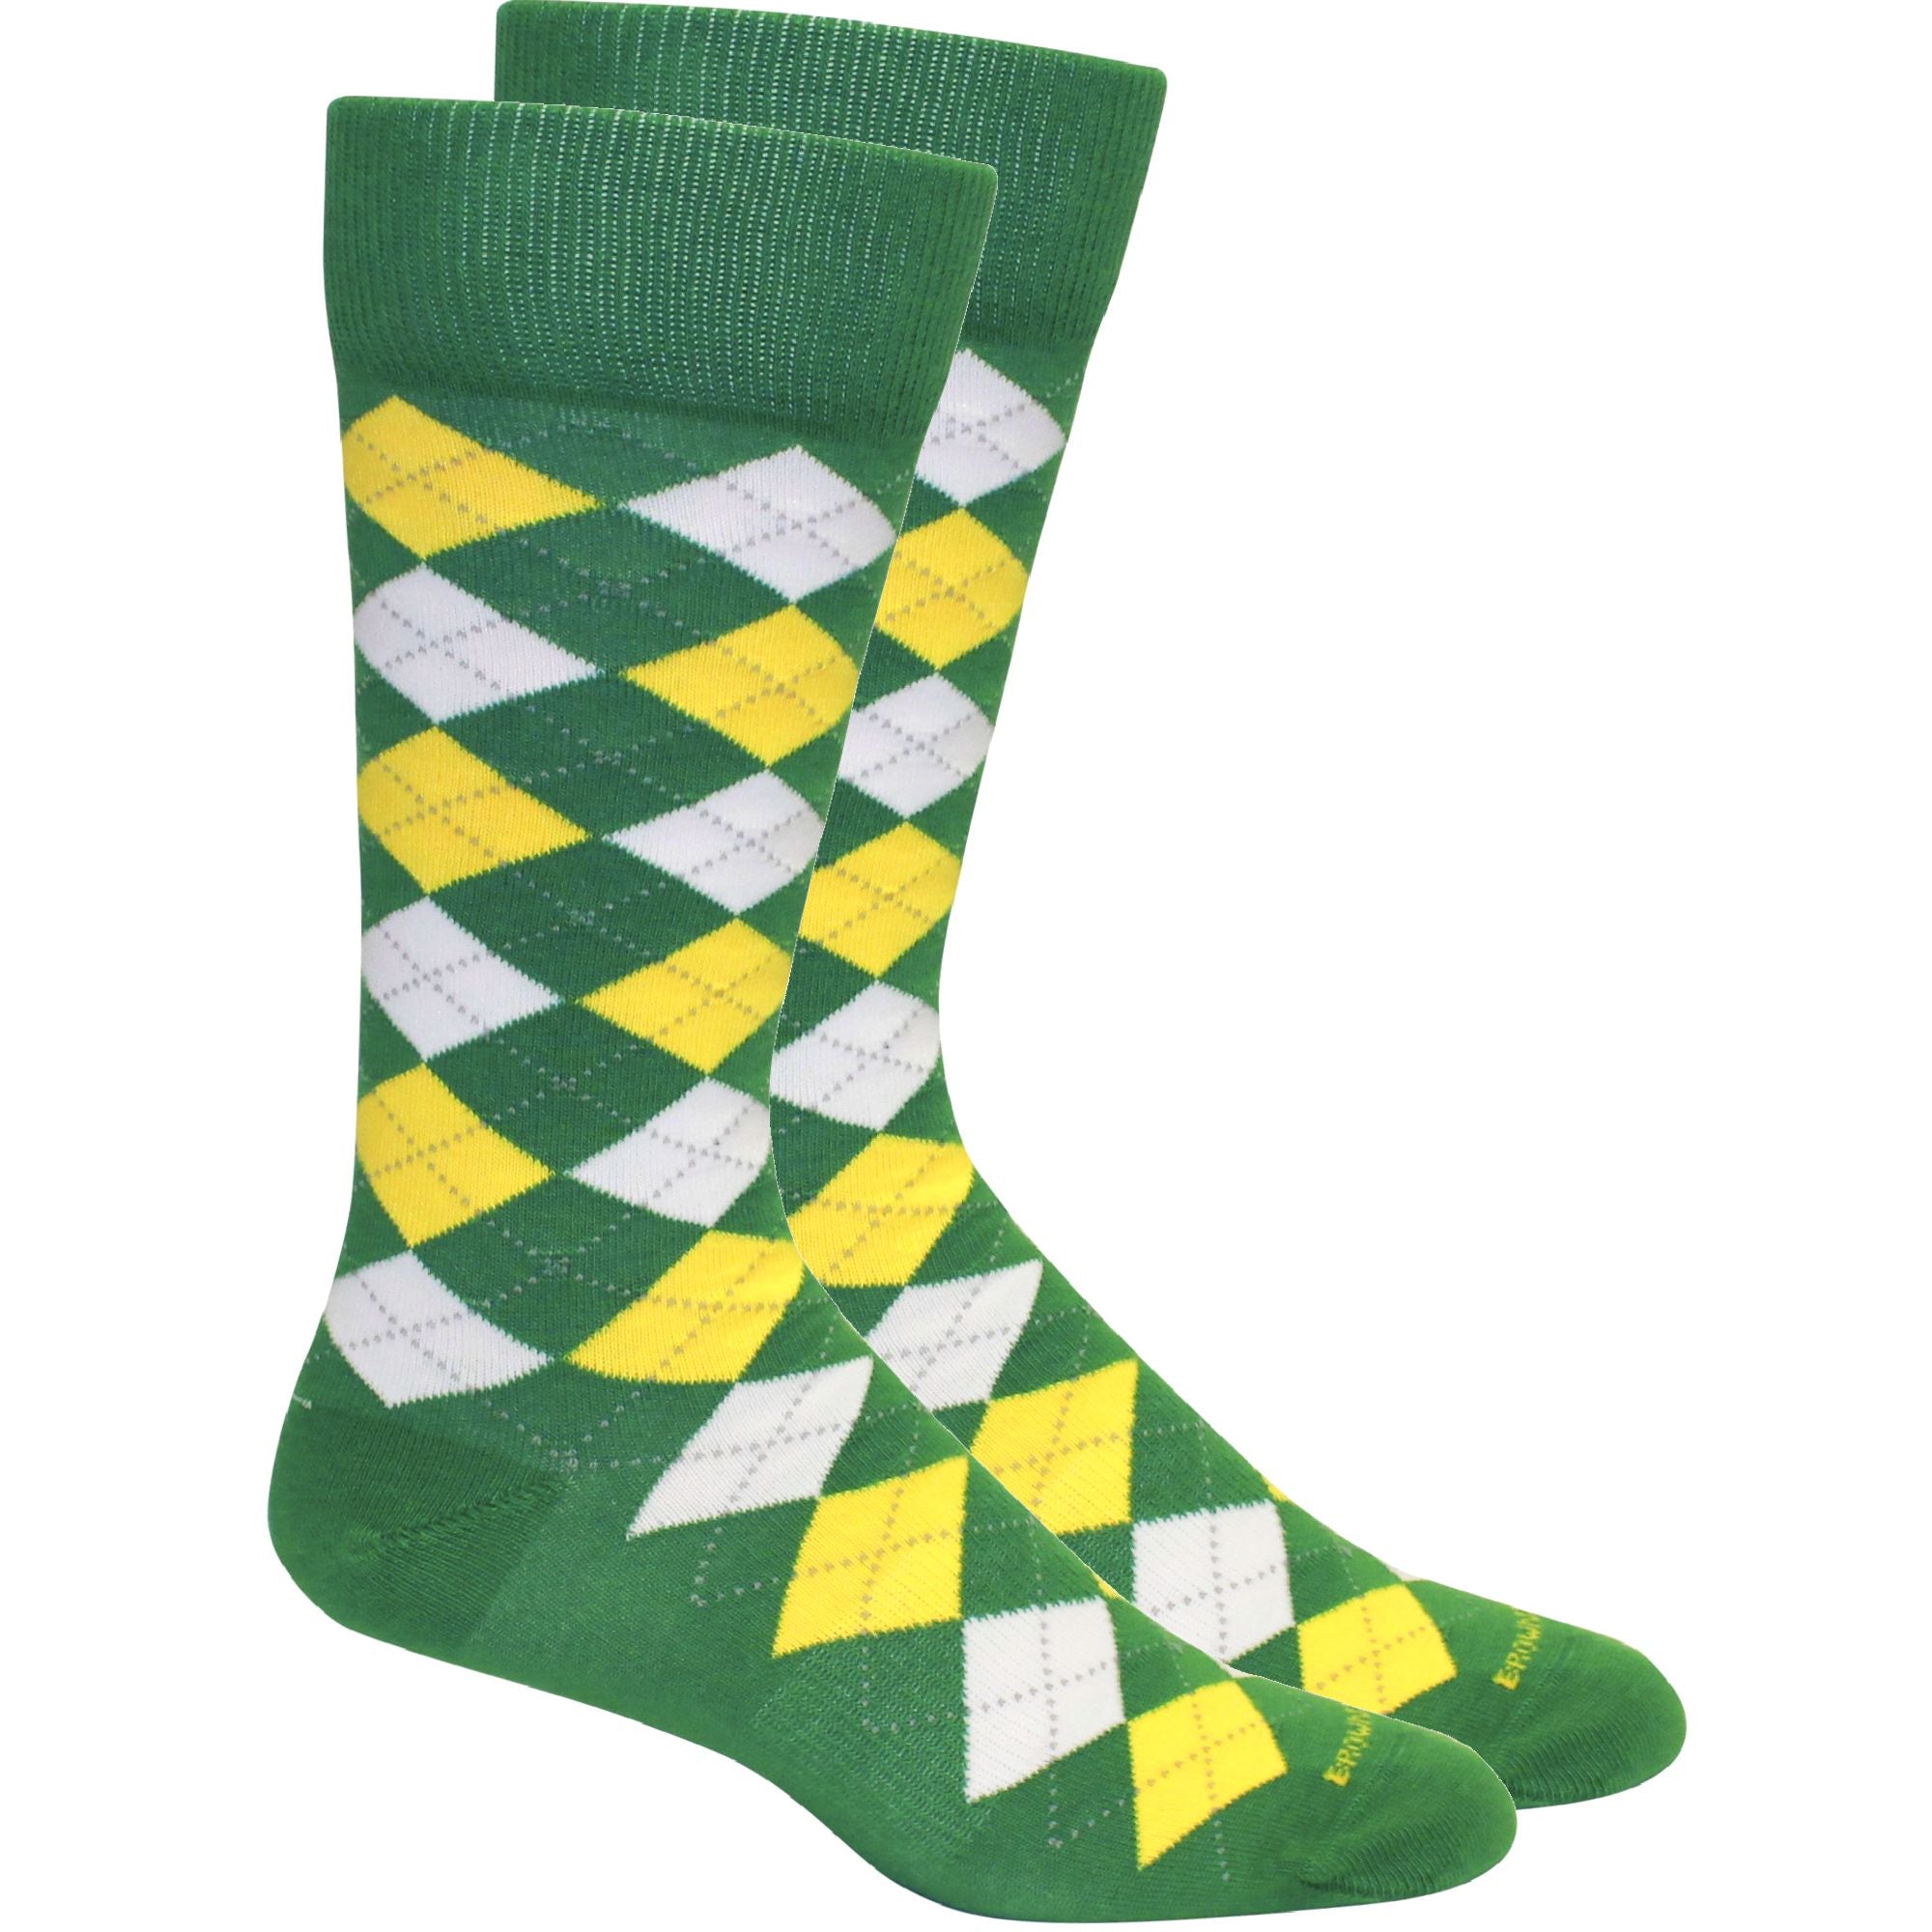 Argyle Cotton Socks in Jolly Green and Yellow by Brown Dog Hosiery